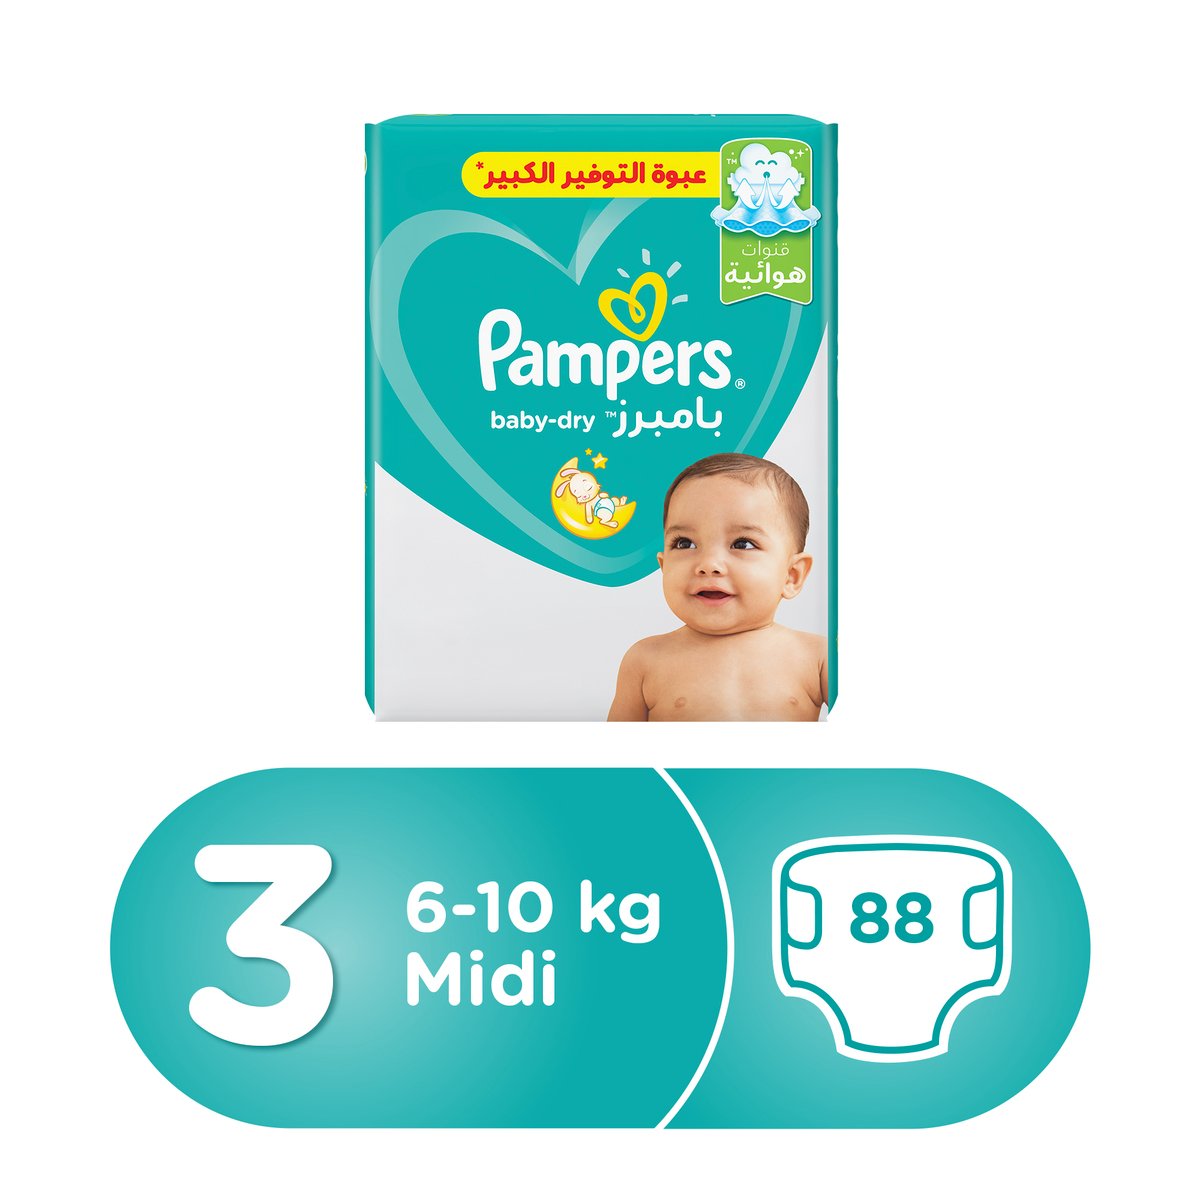 Pampers Active Baby Dry Diapers Giant Pack Size 3 Midi 6 -10kg 88pcs